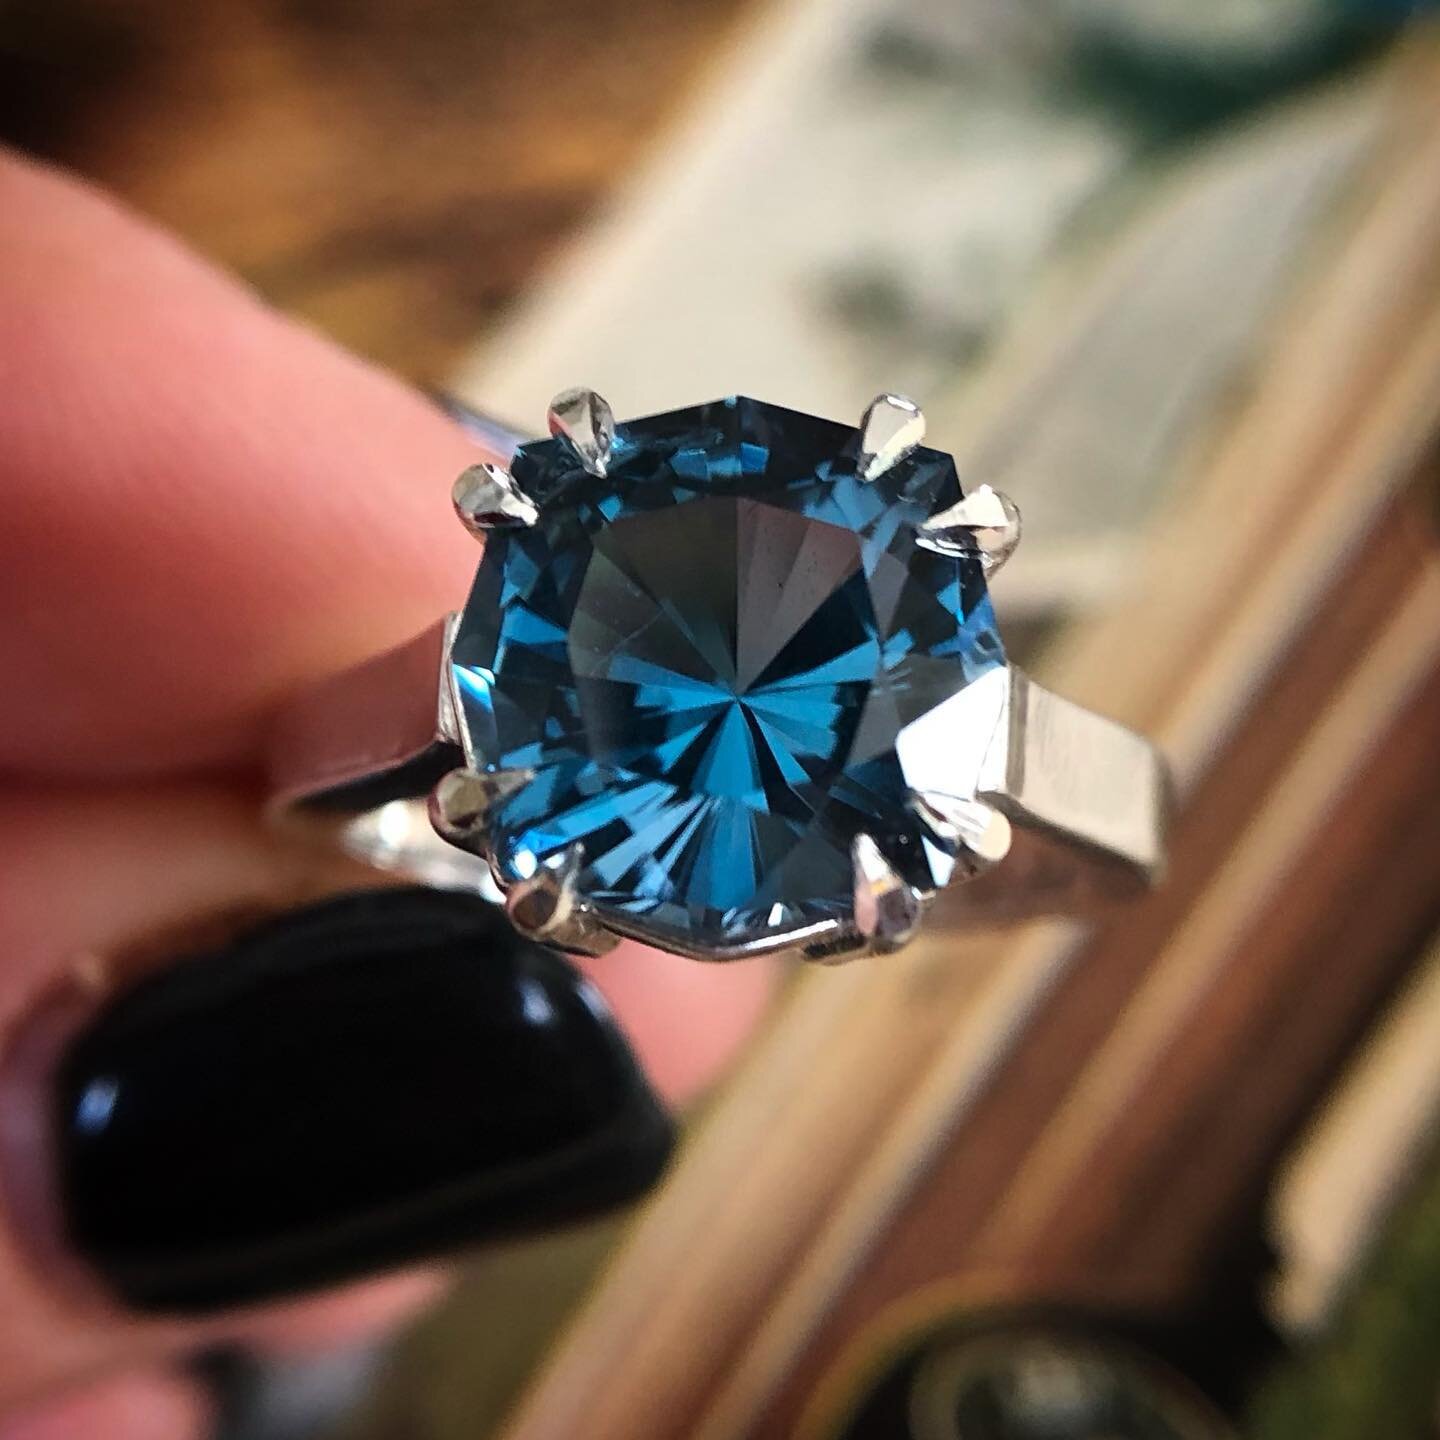 Fresh off the bench. 
Hand fabricated ring by my babe. London blue topaz by me @steadygems 💎